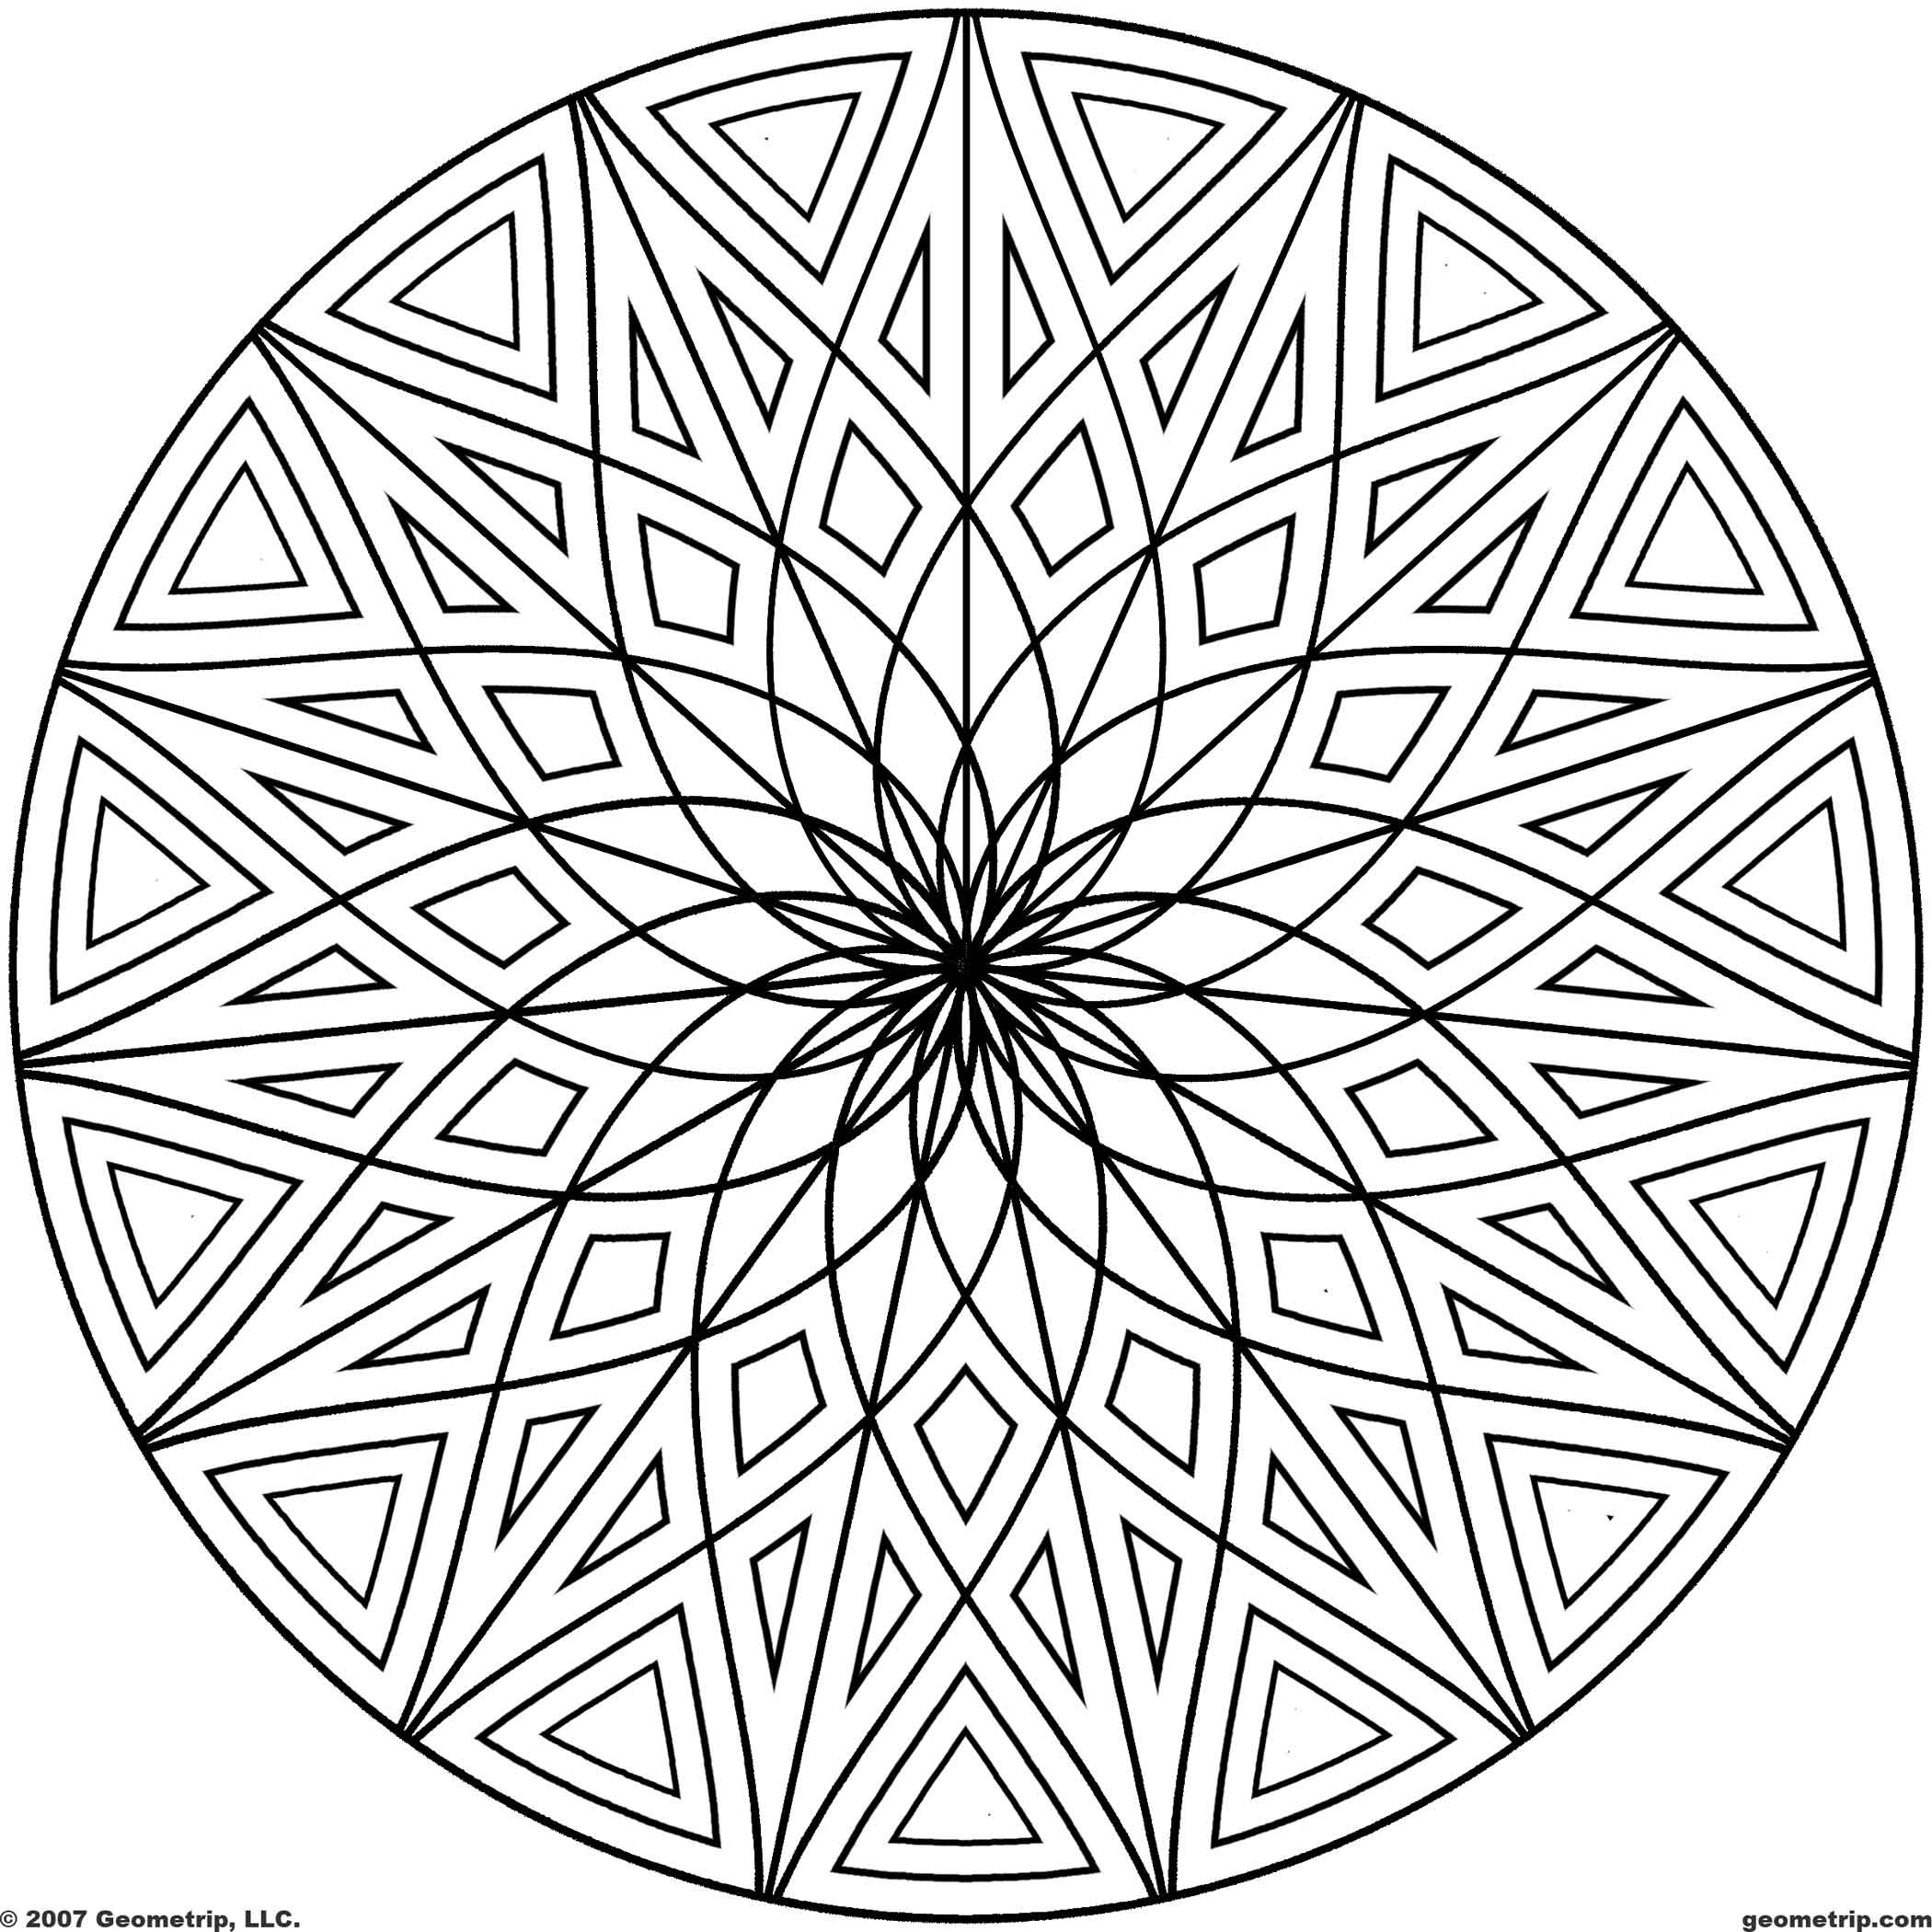 Awesome Design Coloring Pages - High Quality Coloring Pages